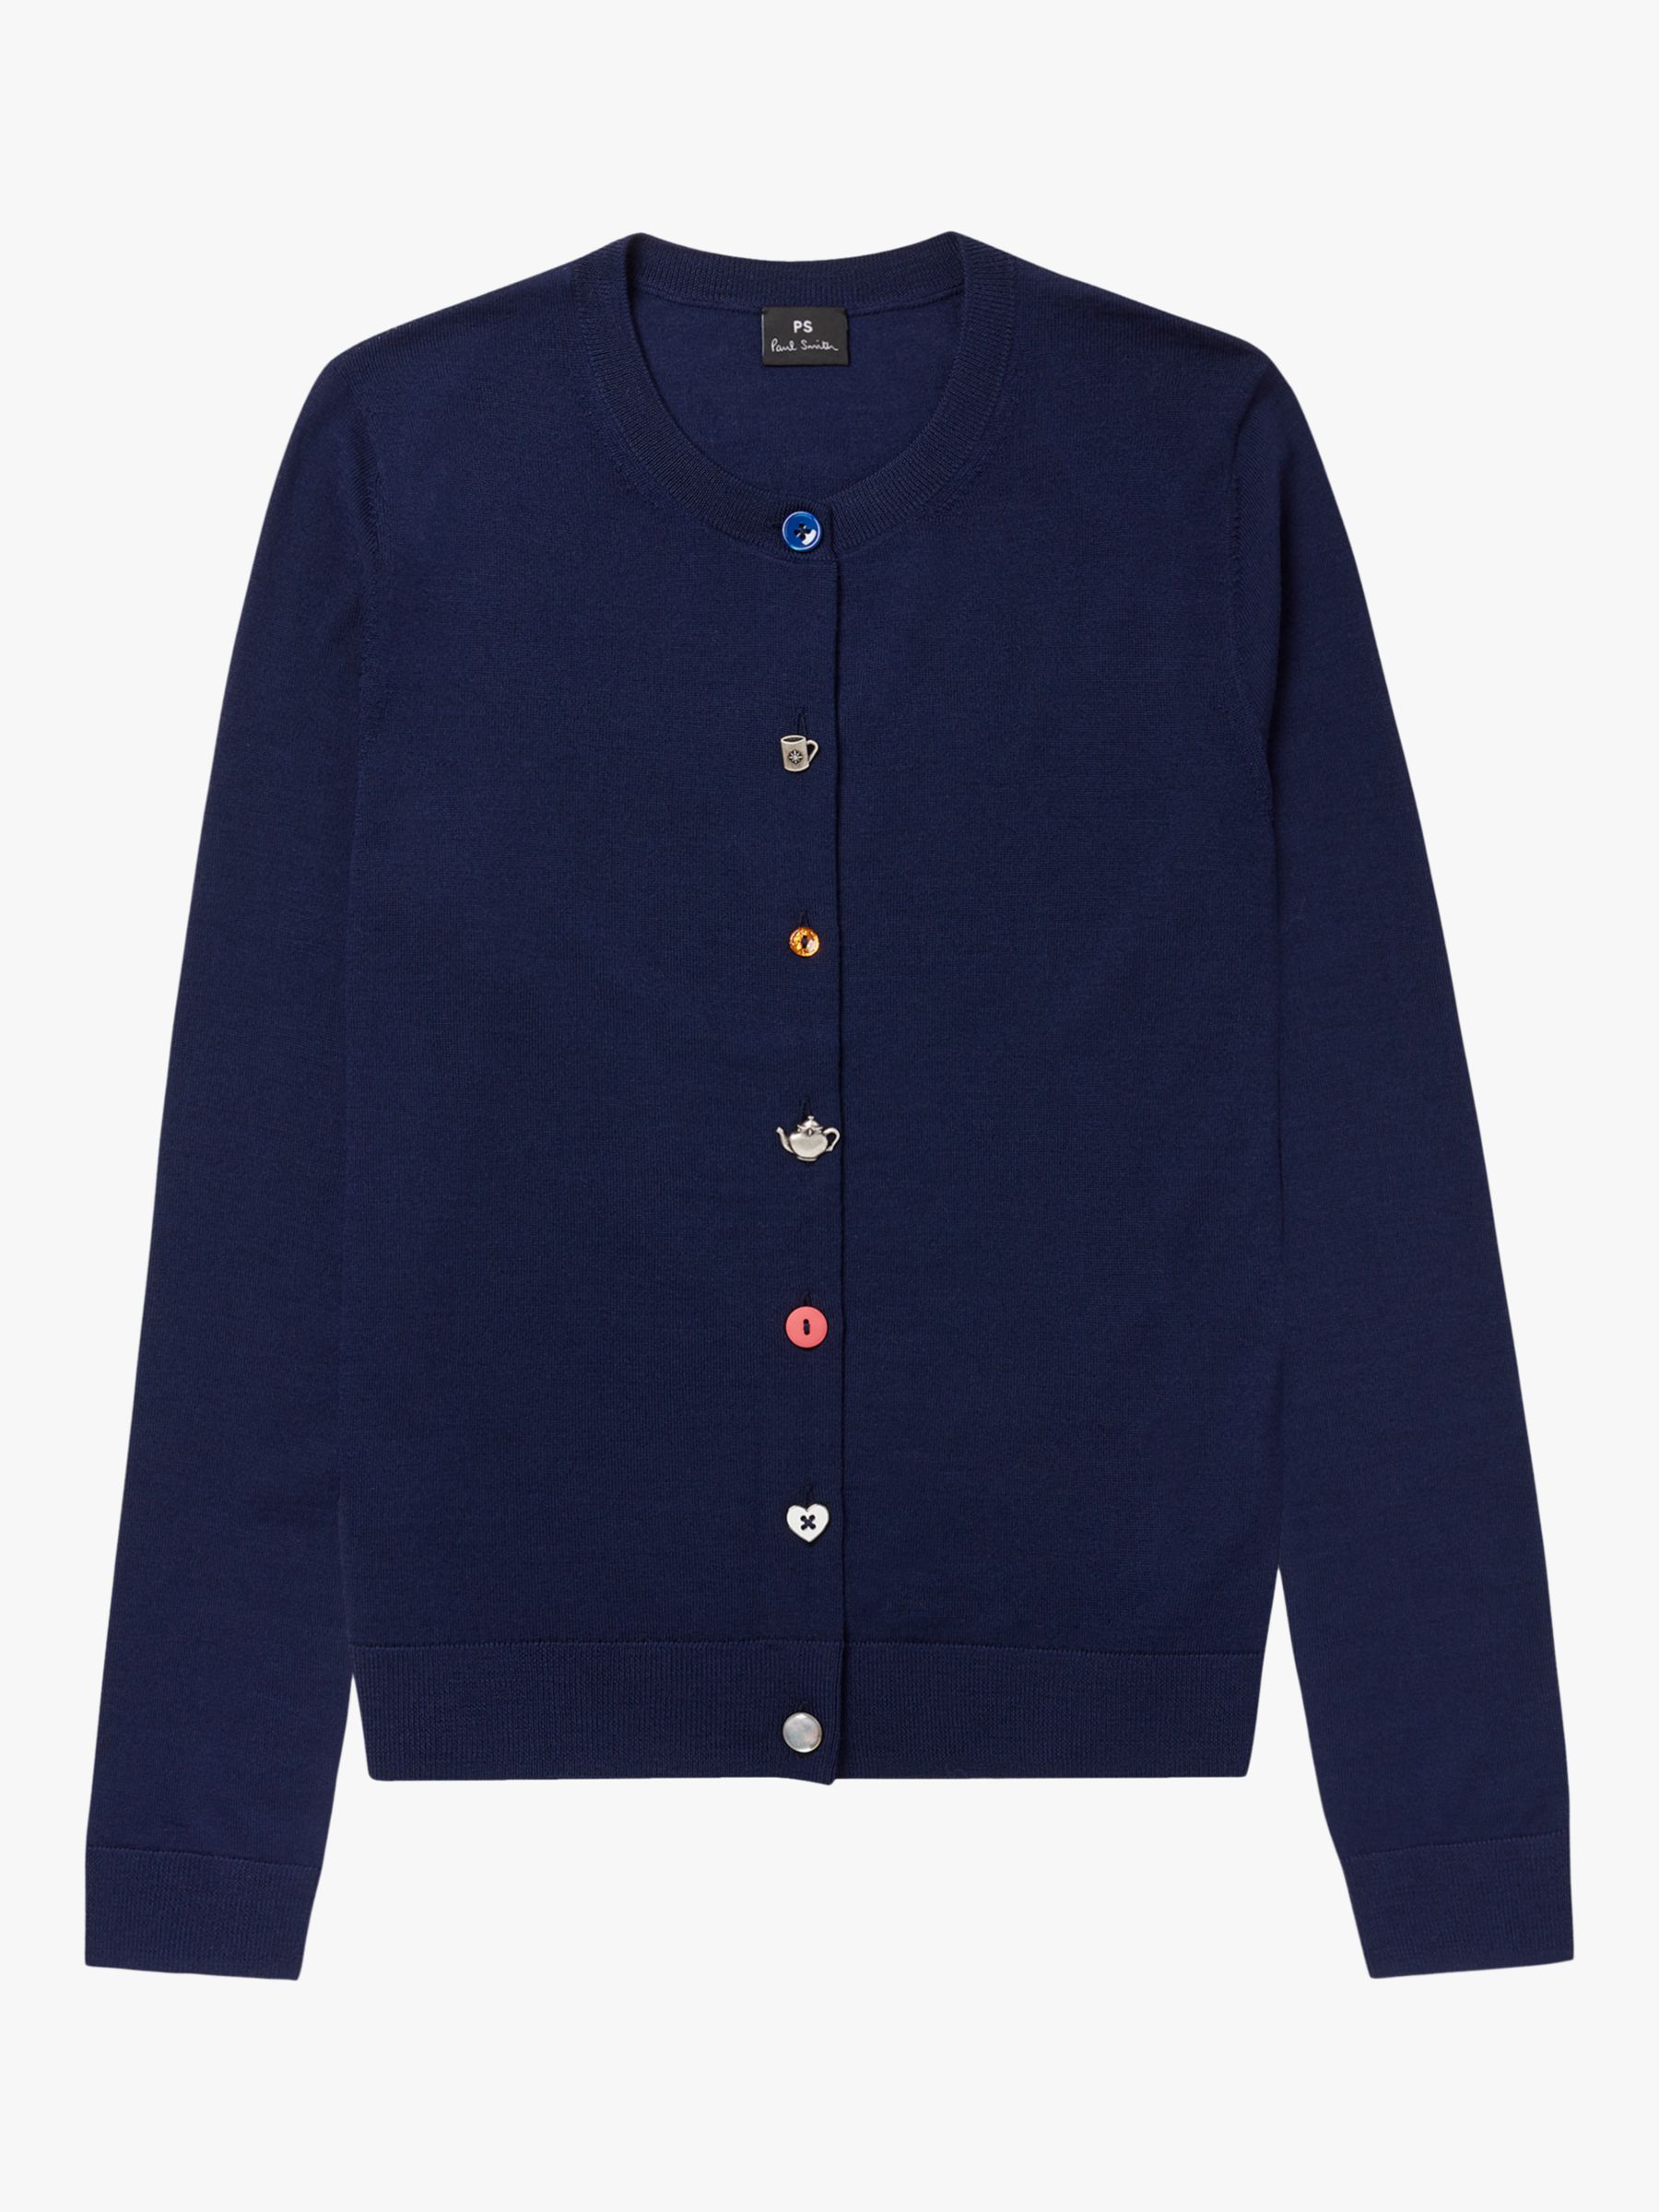 PS Paul Smith Multi Button Wool Cardigan, Navy